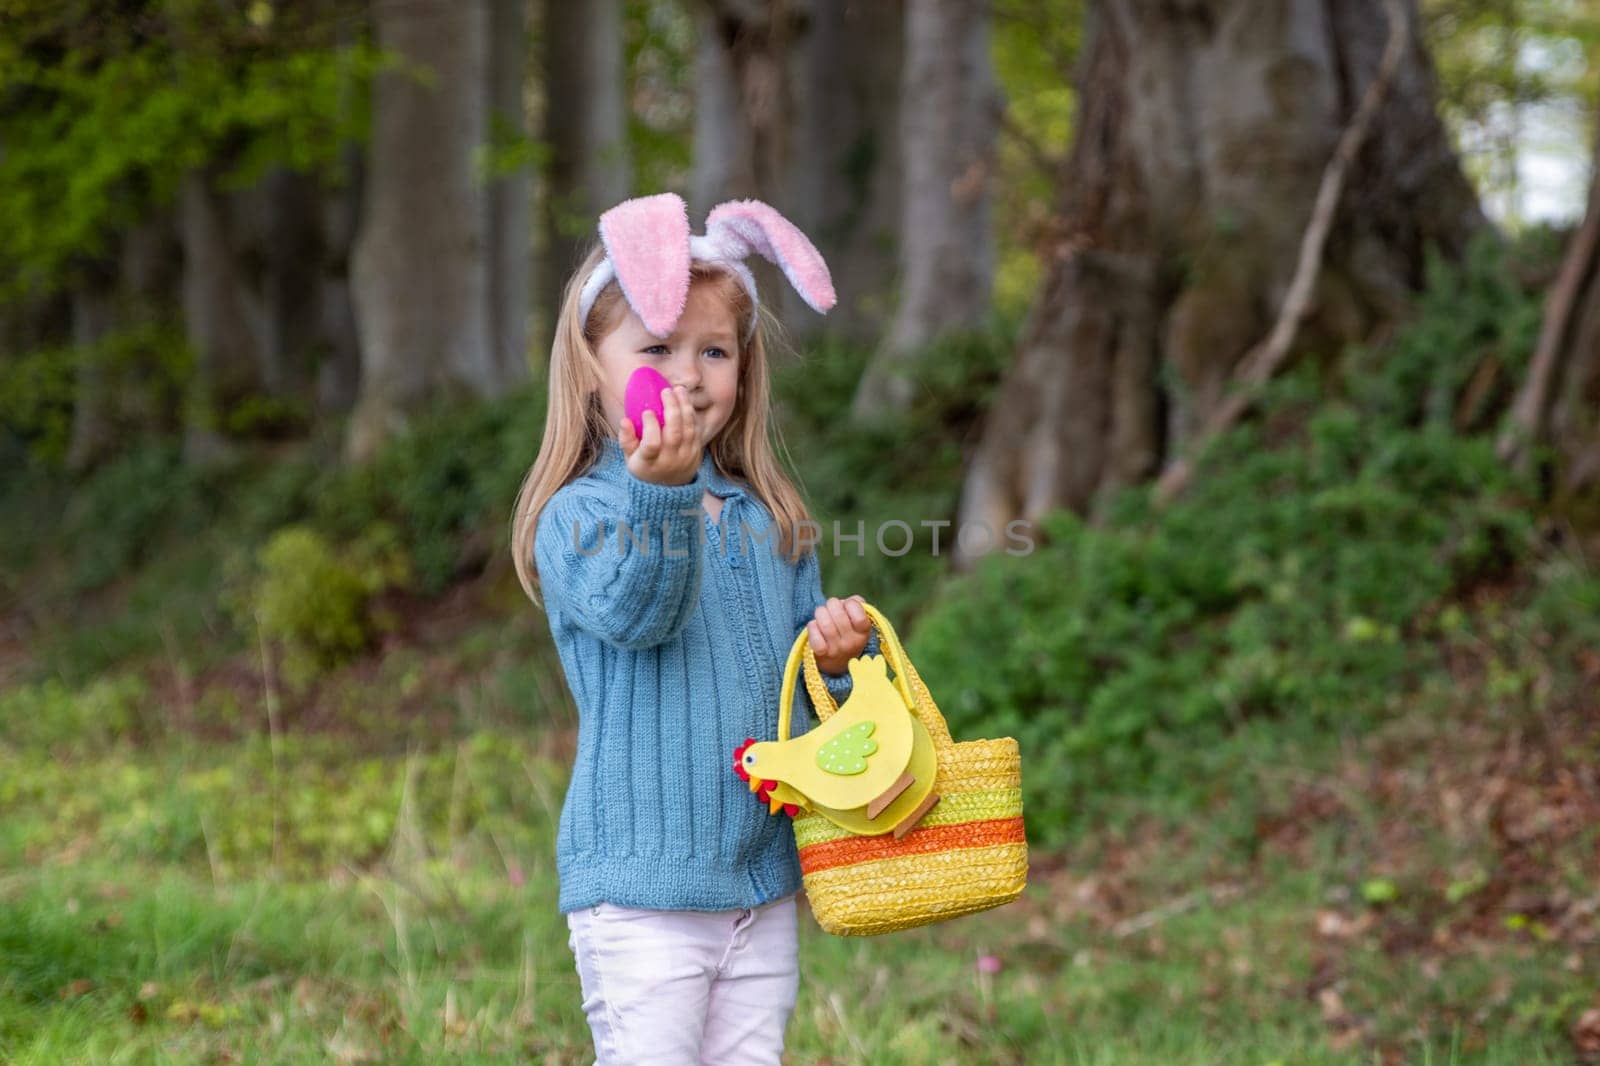 Girl with bunny ears collects the eggs in a basket for Easter